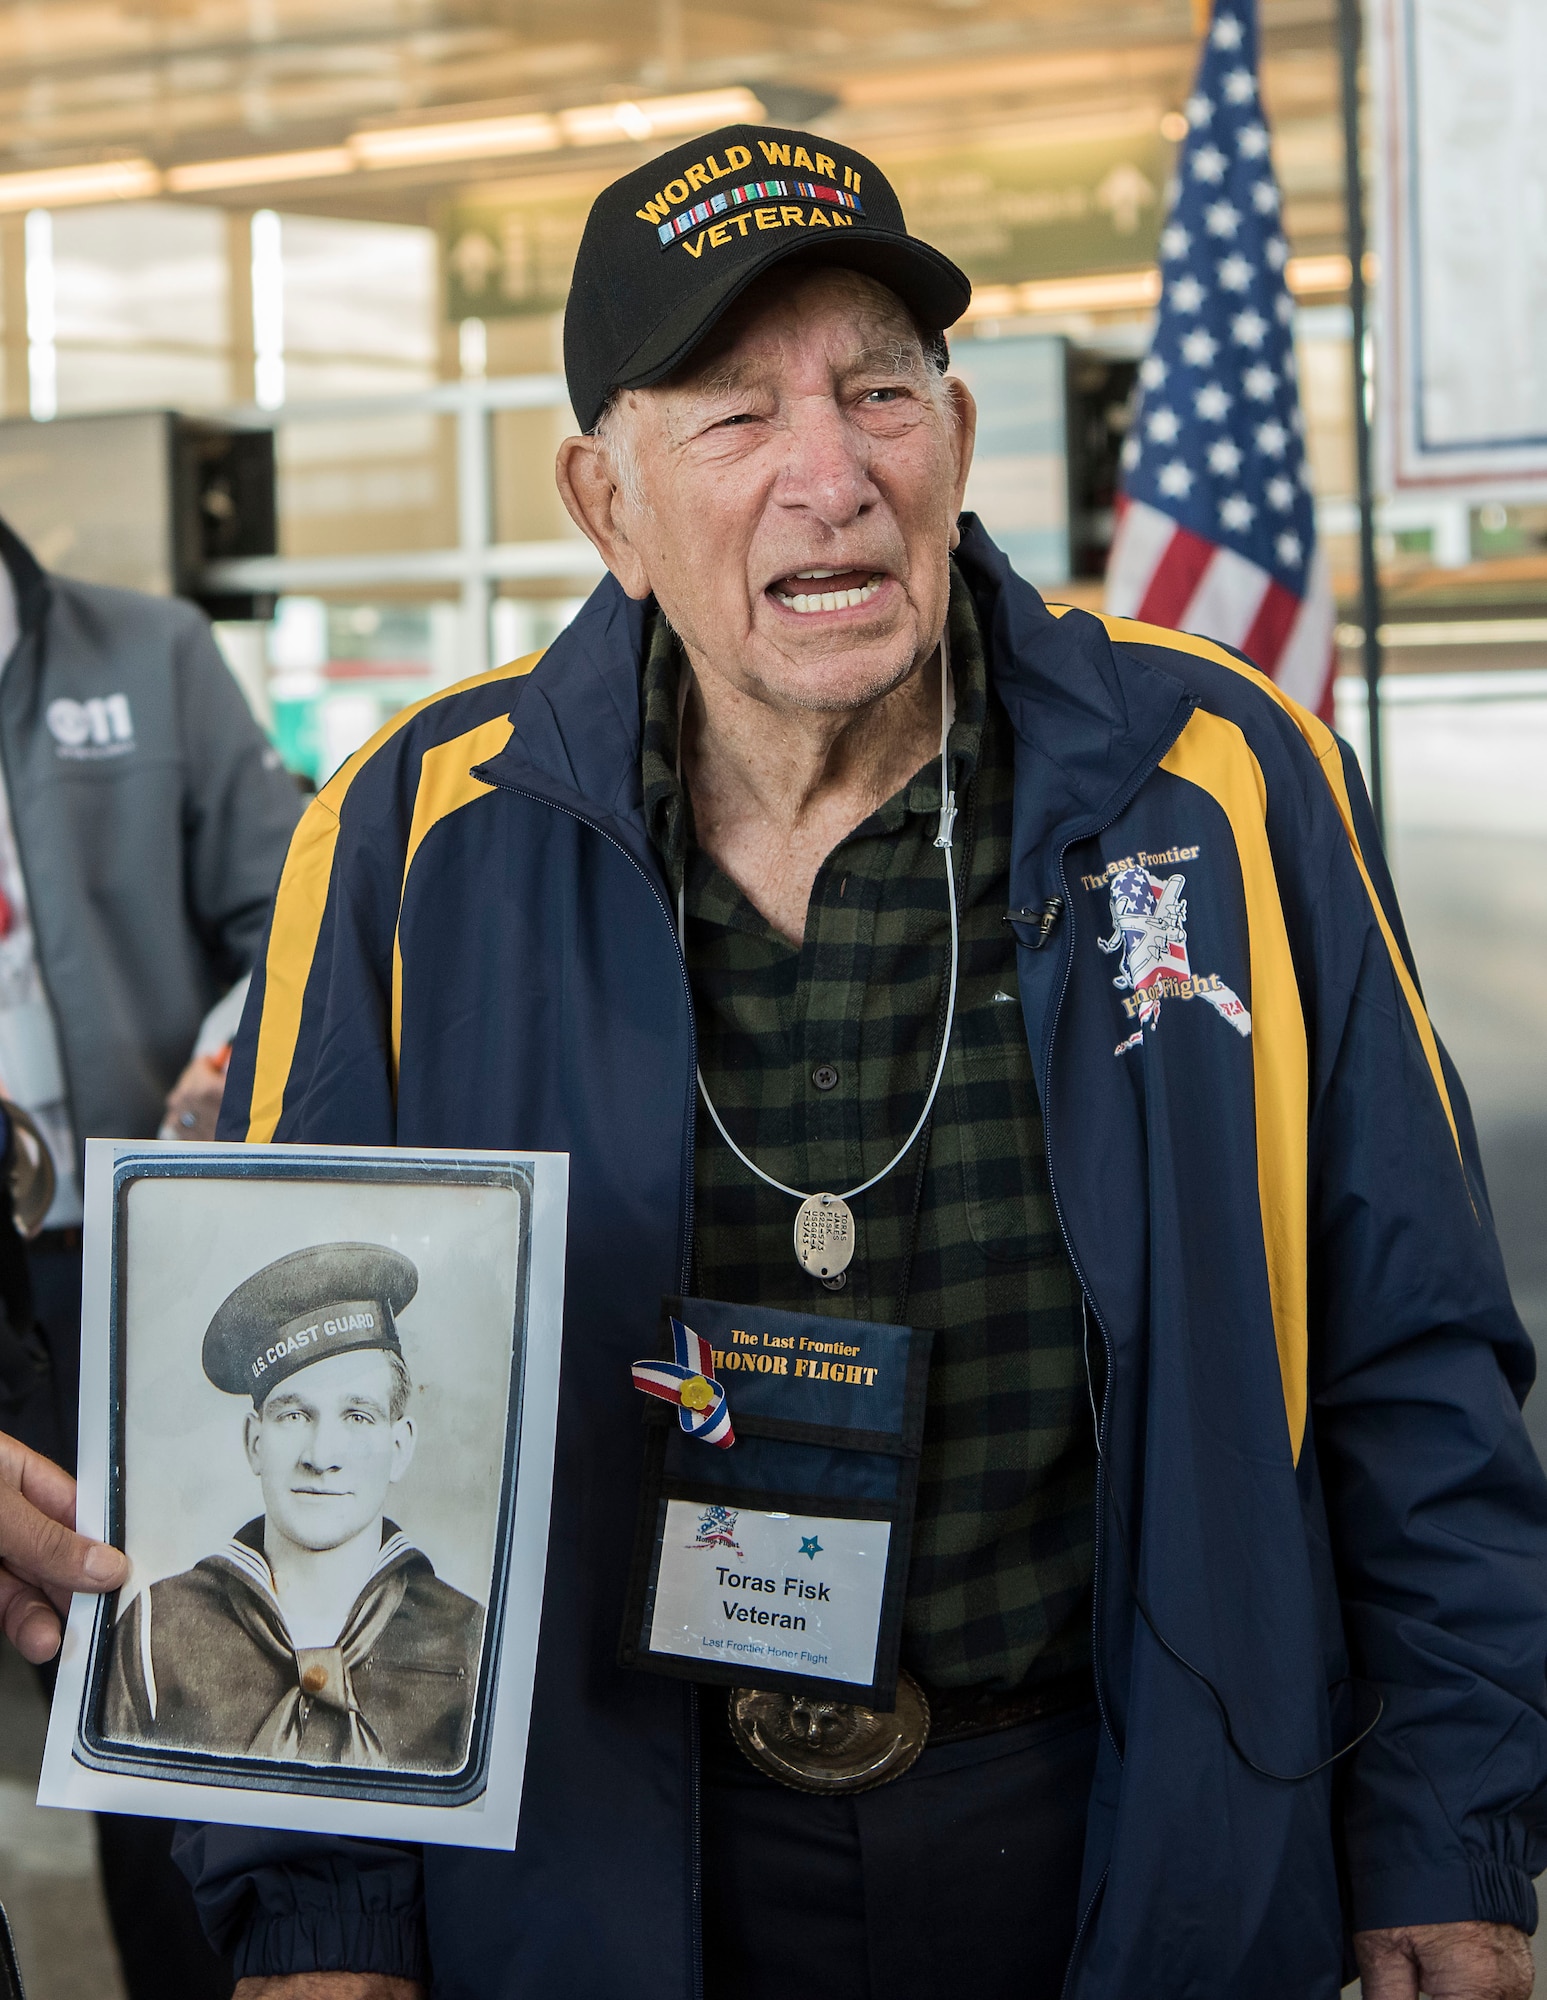 Toras Fisk, a World War II veteran, stands by an official military photo of himself, at Ted Stevens International Airport, before leaving for Washington, D.C., with the Last Frontier Honor Flight, Alaska, Oct. 16, 2018. The program offers veterans the opportunity to visit monuments erected in their honor such as the National World War II Memorial, the Korean War Veterans Memorial and the Vietnam Veterans Memorial.